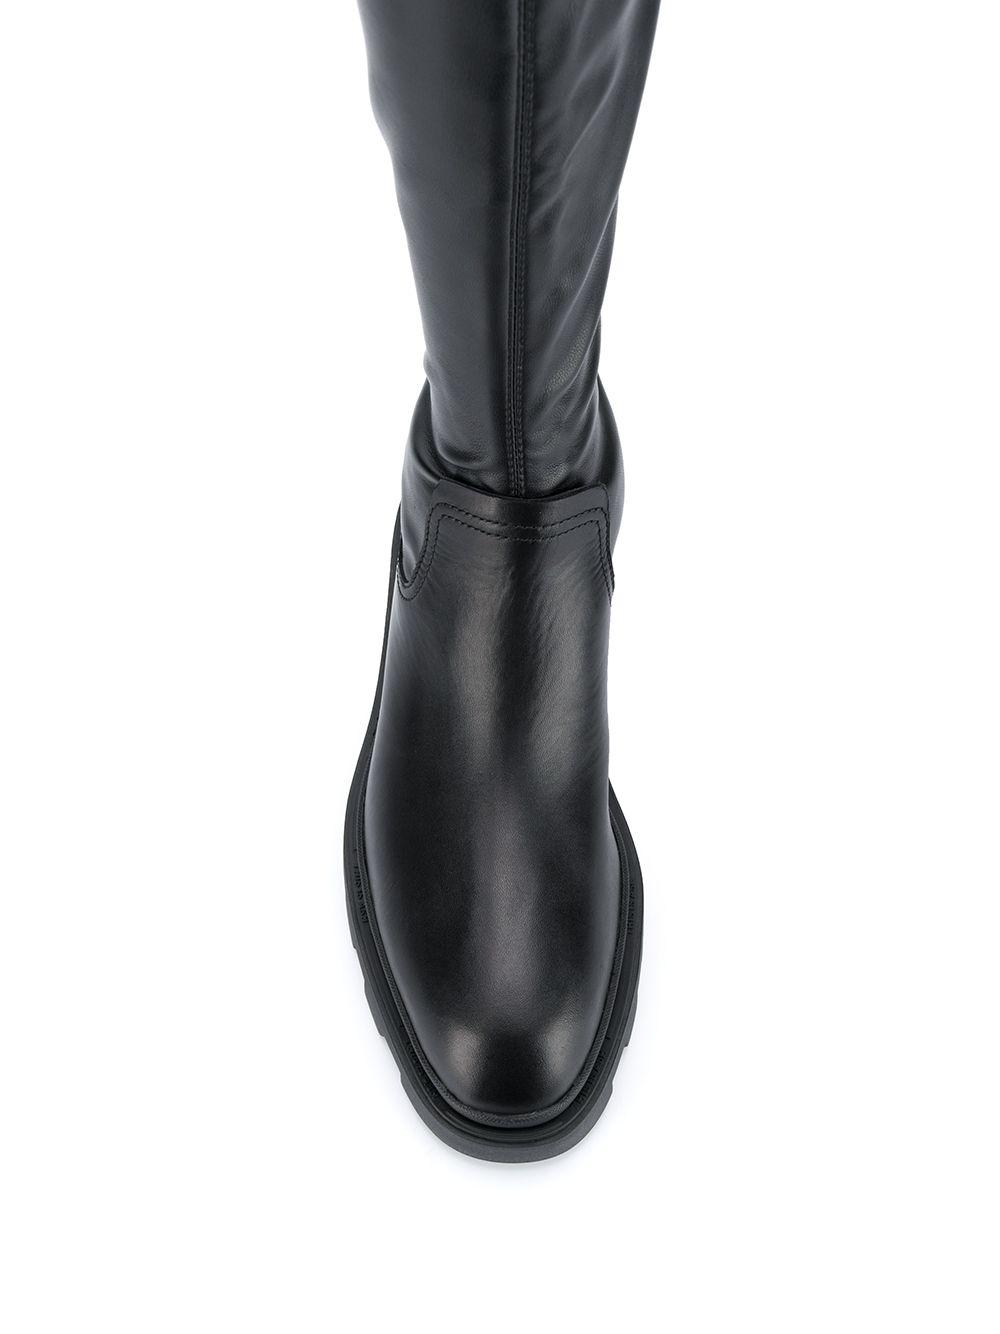 Ash Manhattan Over The Knee Boots in Black | Lyst